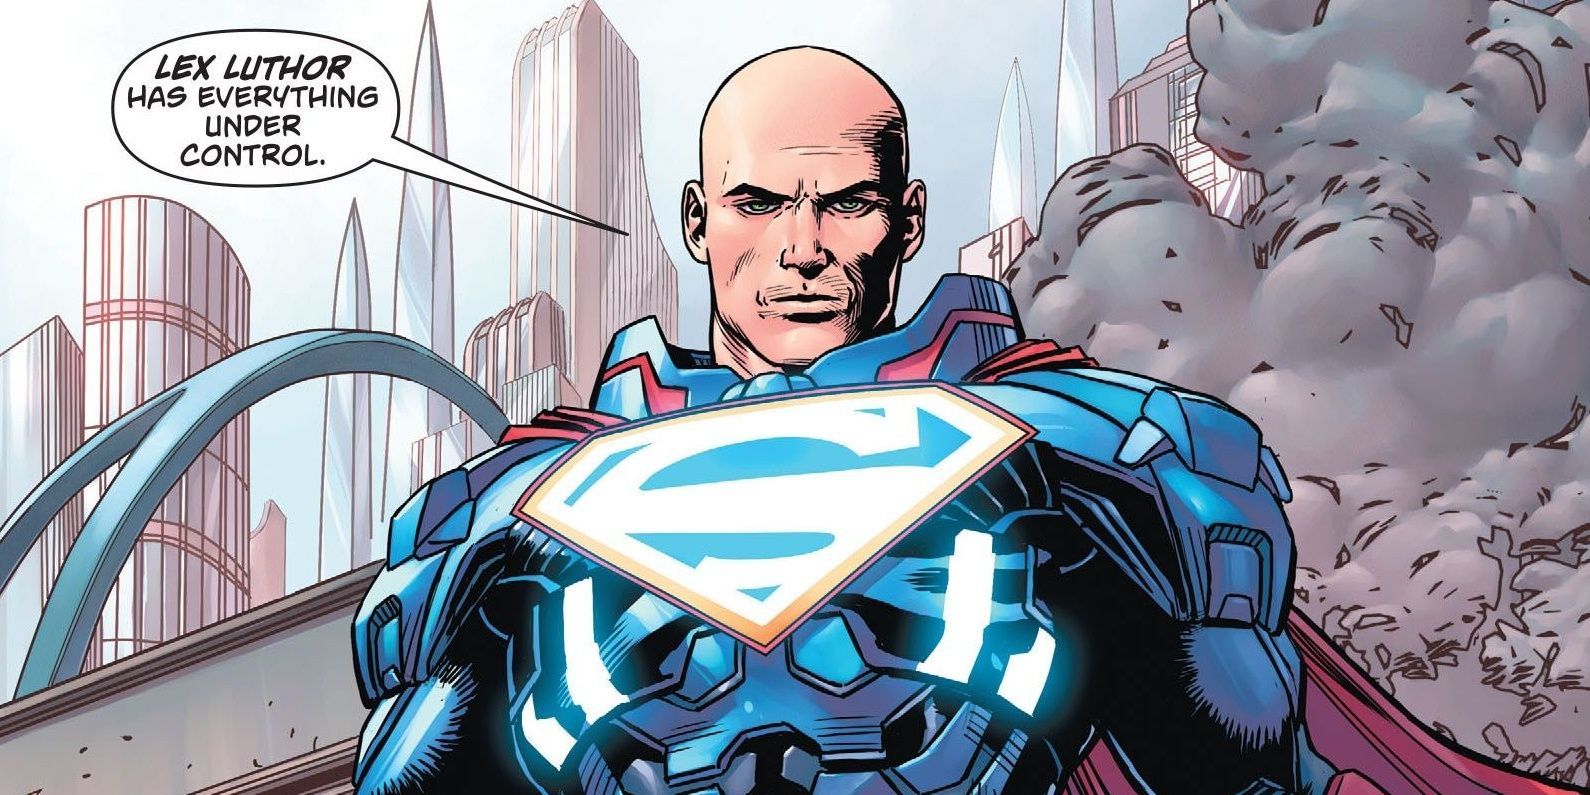 Lex Luthor Wearing powered armor made to look like Superman's costume in DC Comics